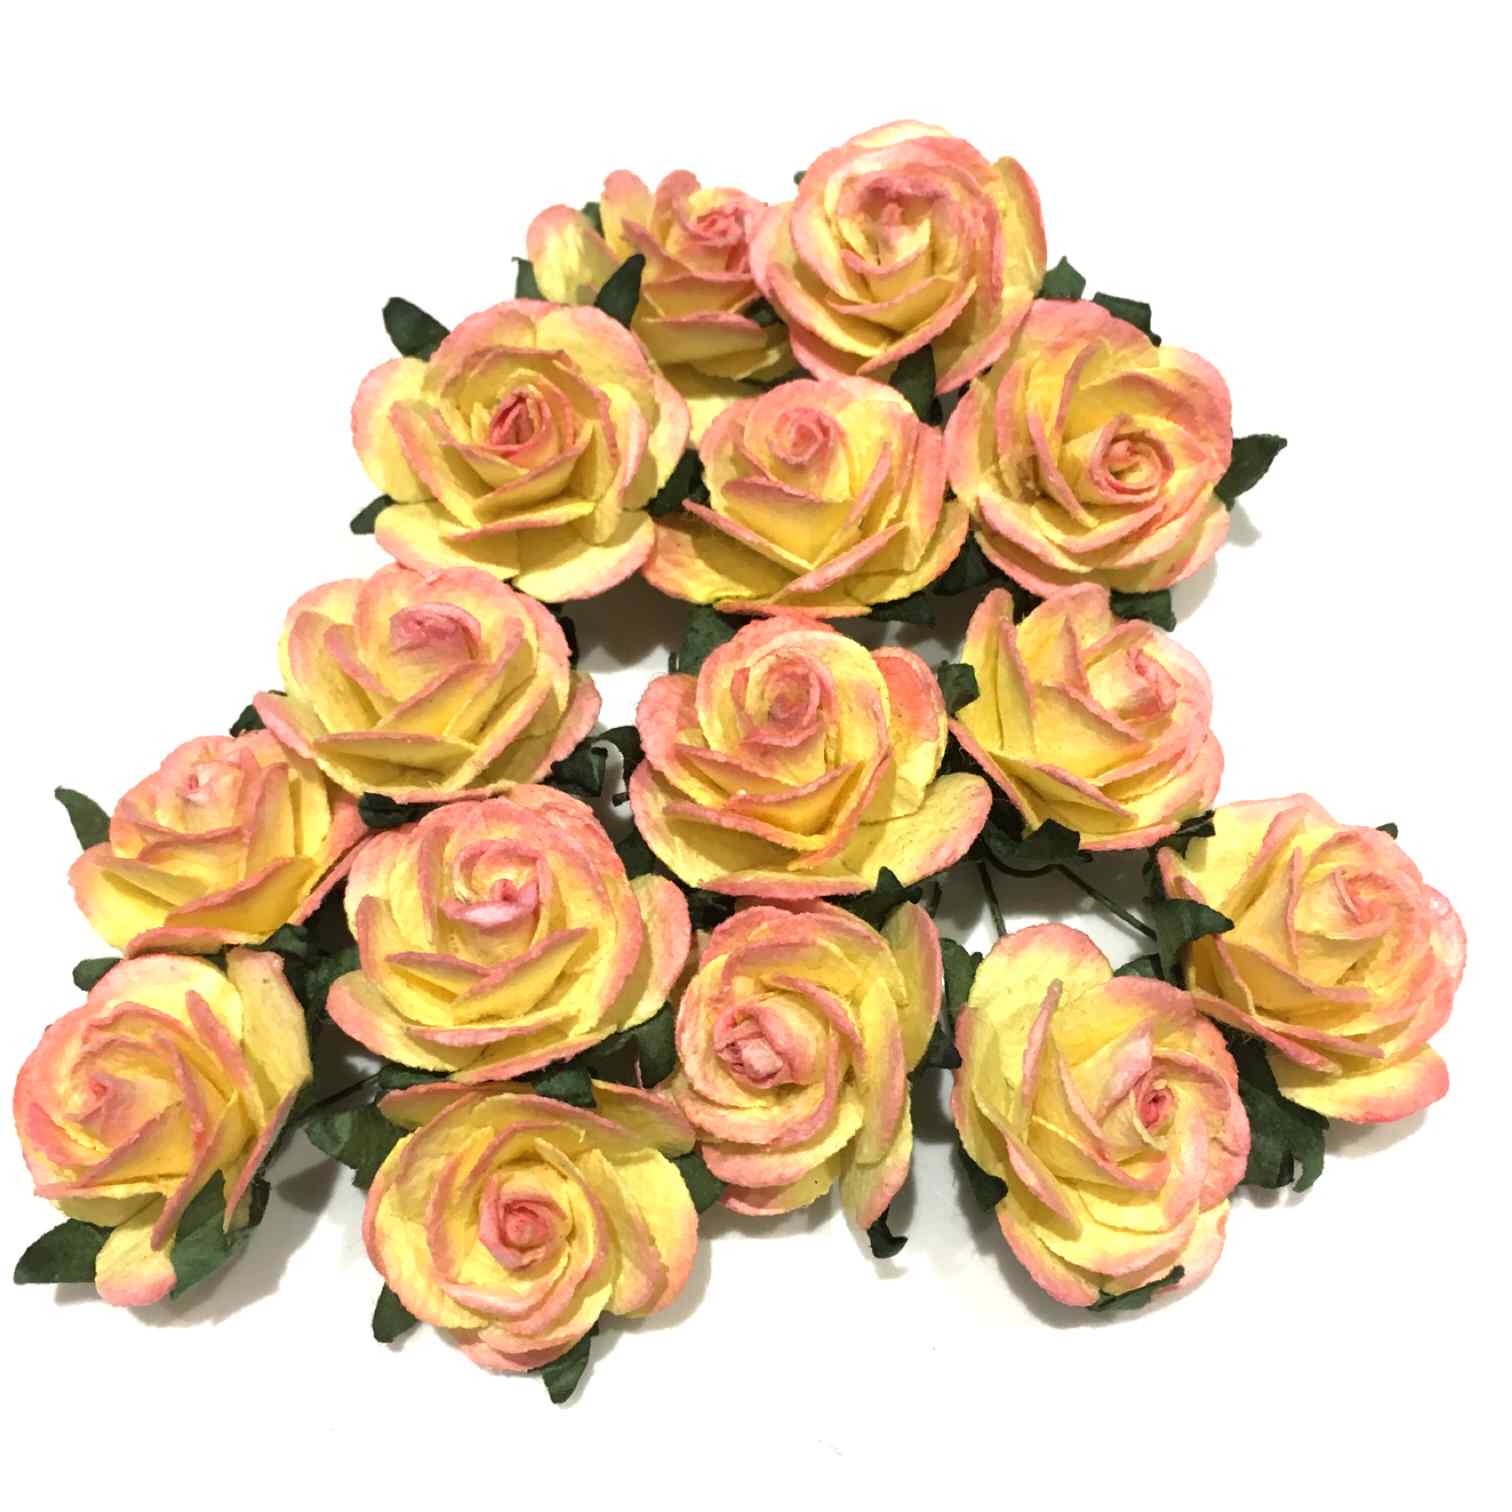 Pink And Cream Open Mulberry Paper Roses Or019